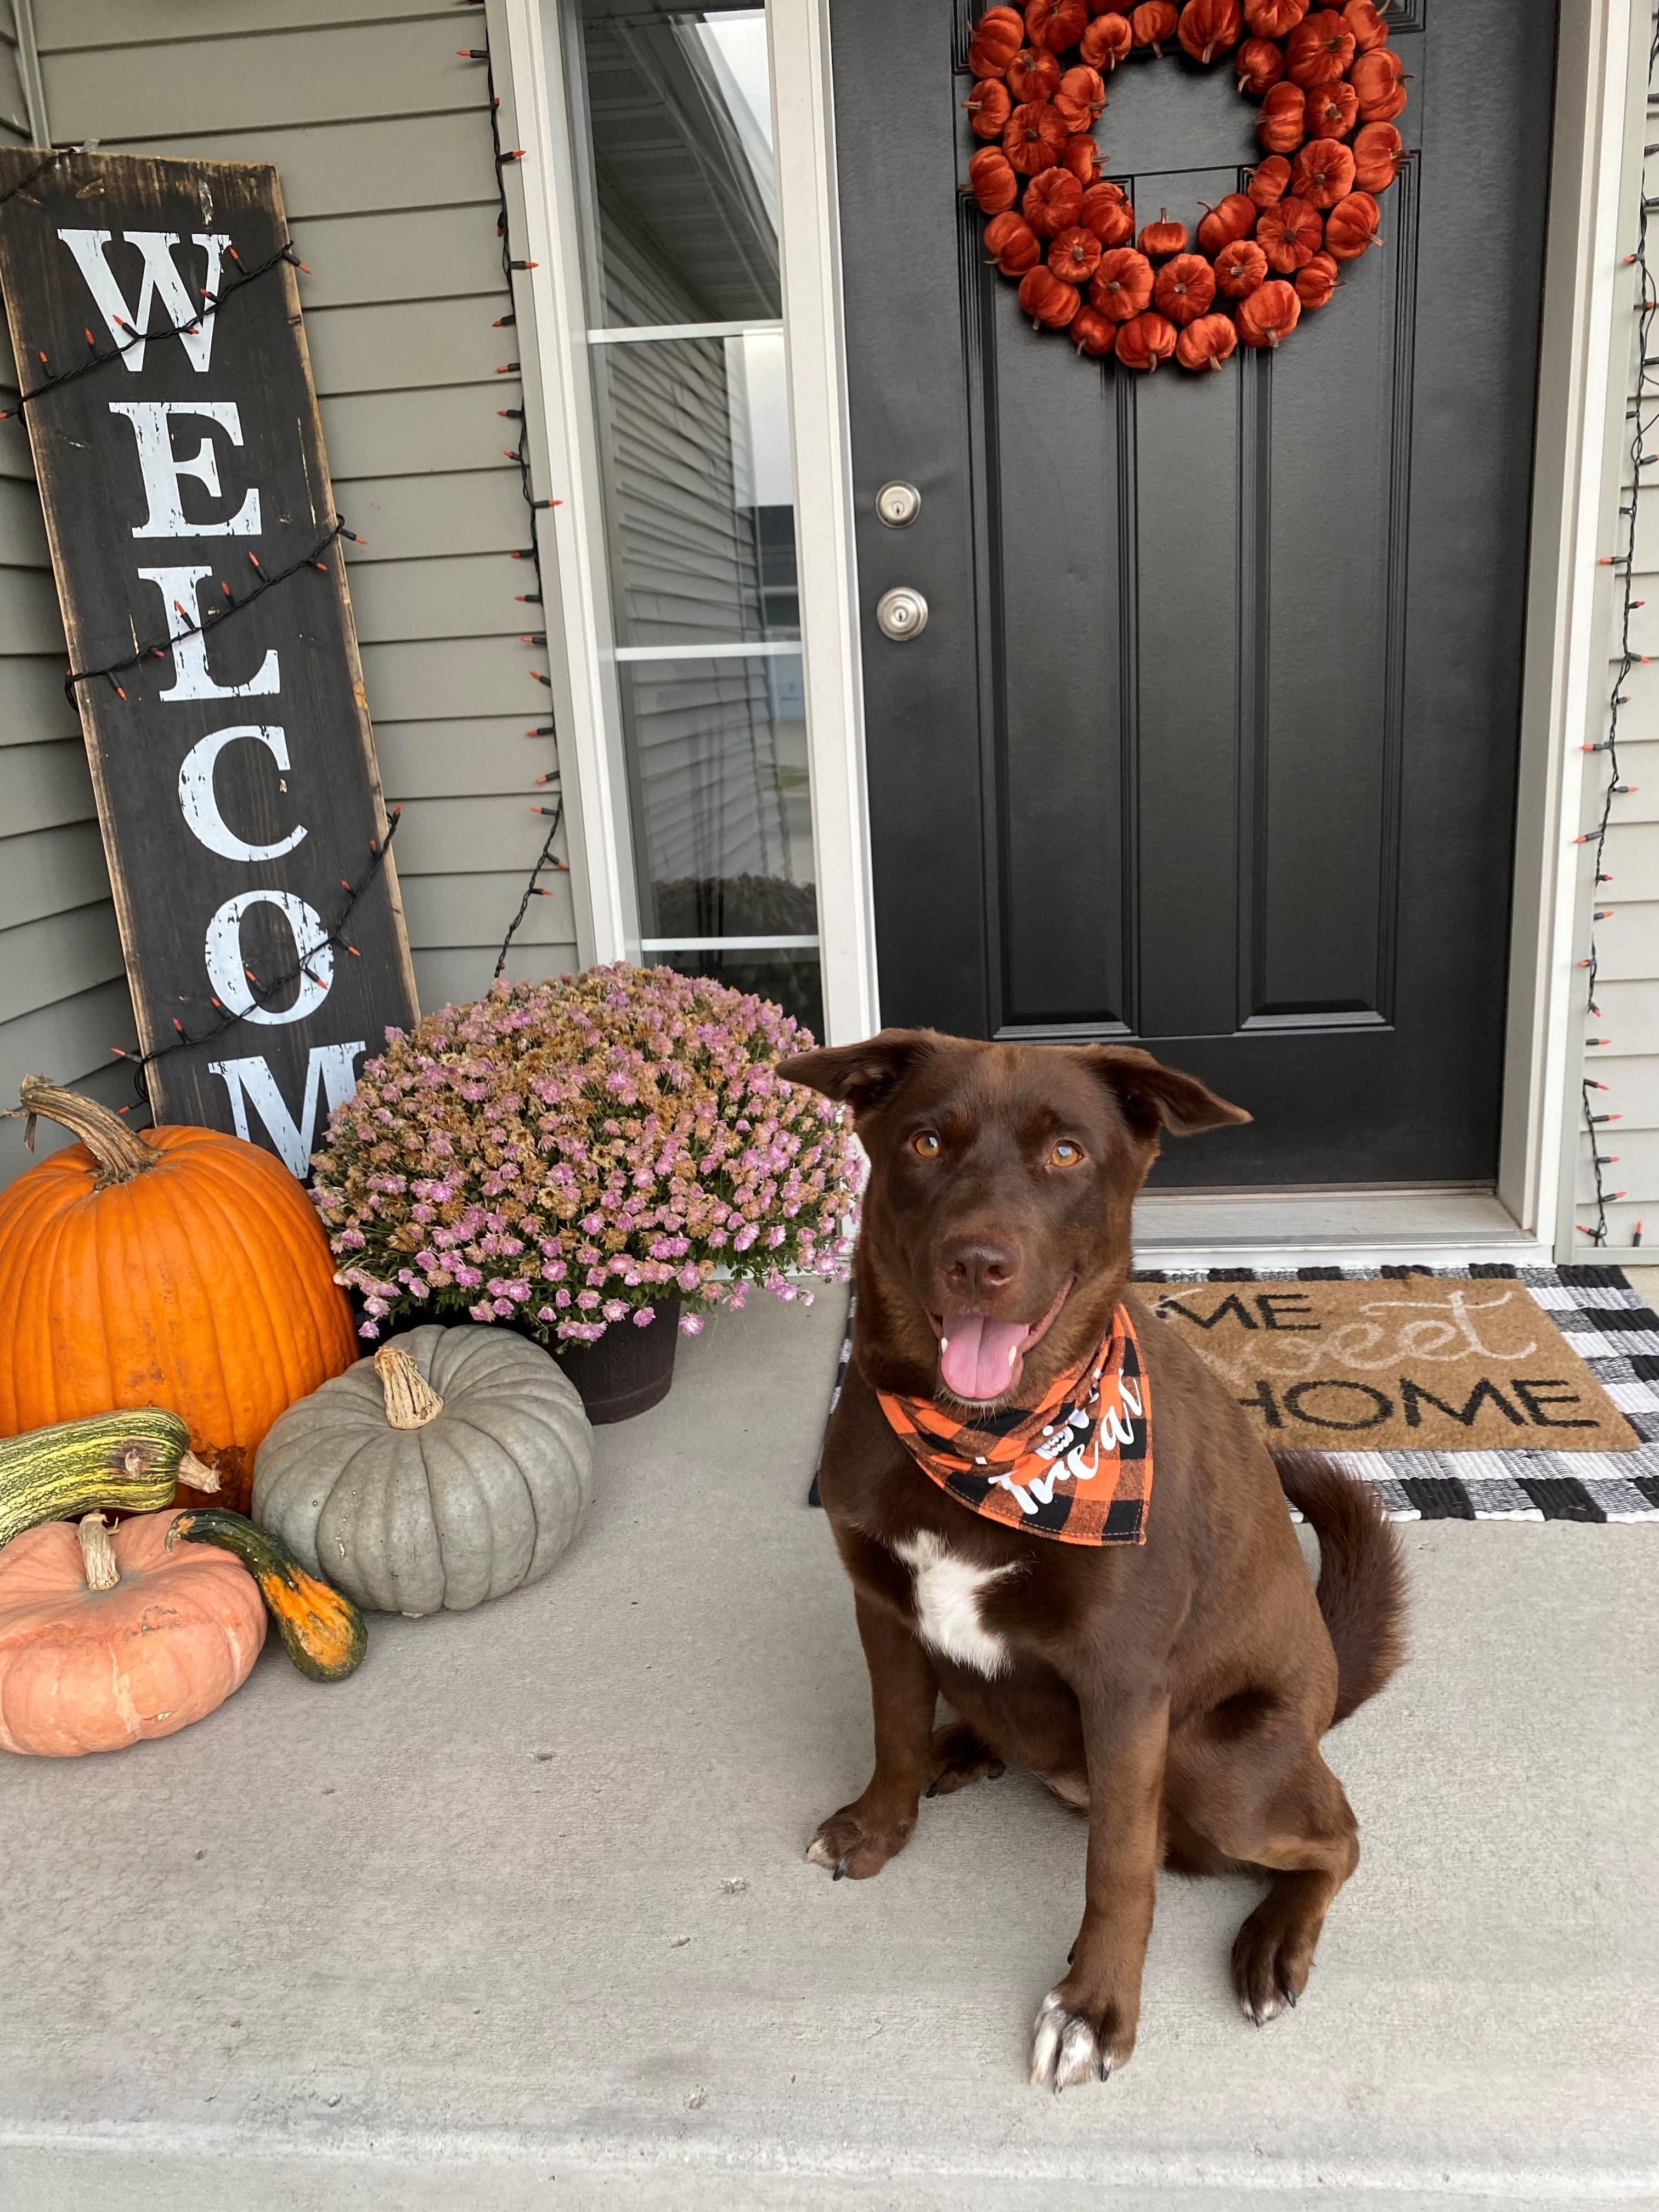 A brown dog sits on a doorstep, wearing a "Trick or Treat" bandana. There are plants, pumpkins, and a "Home Sweet Home" welcome mat, in addition to a large wooden sign covered in orange lights that says "Welcome."